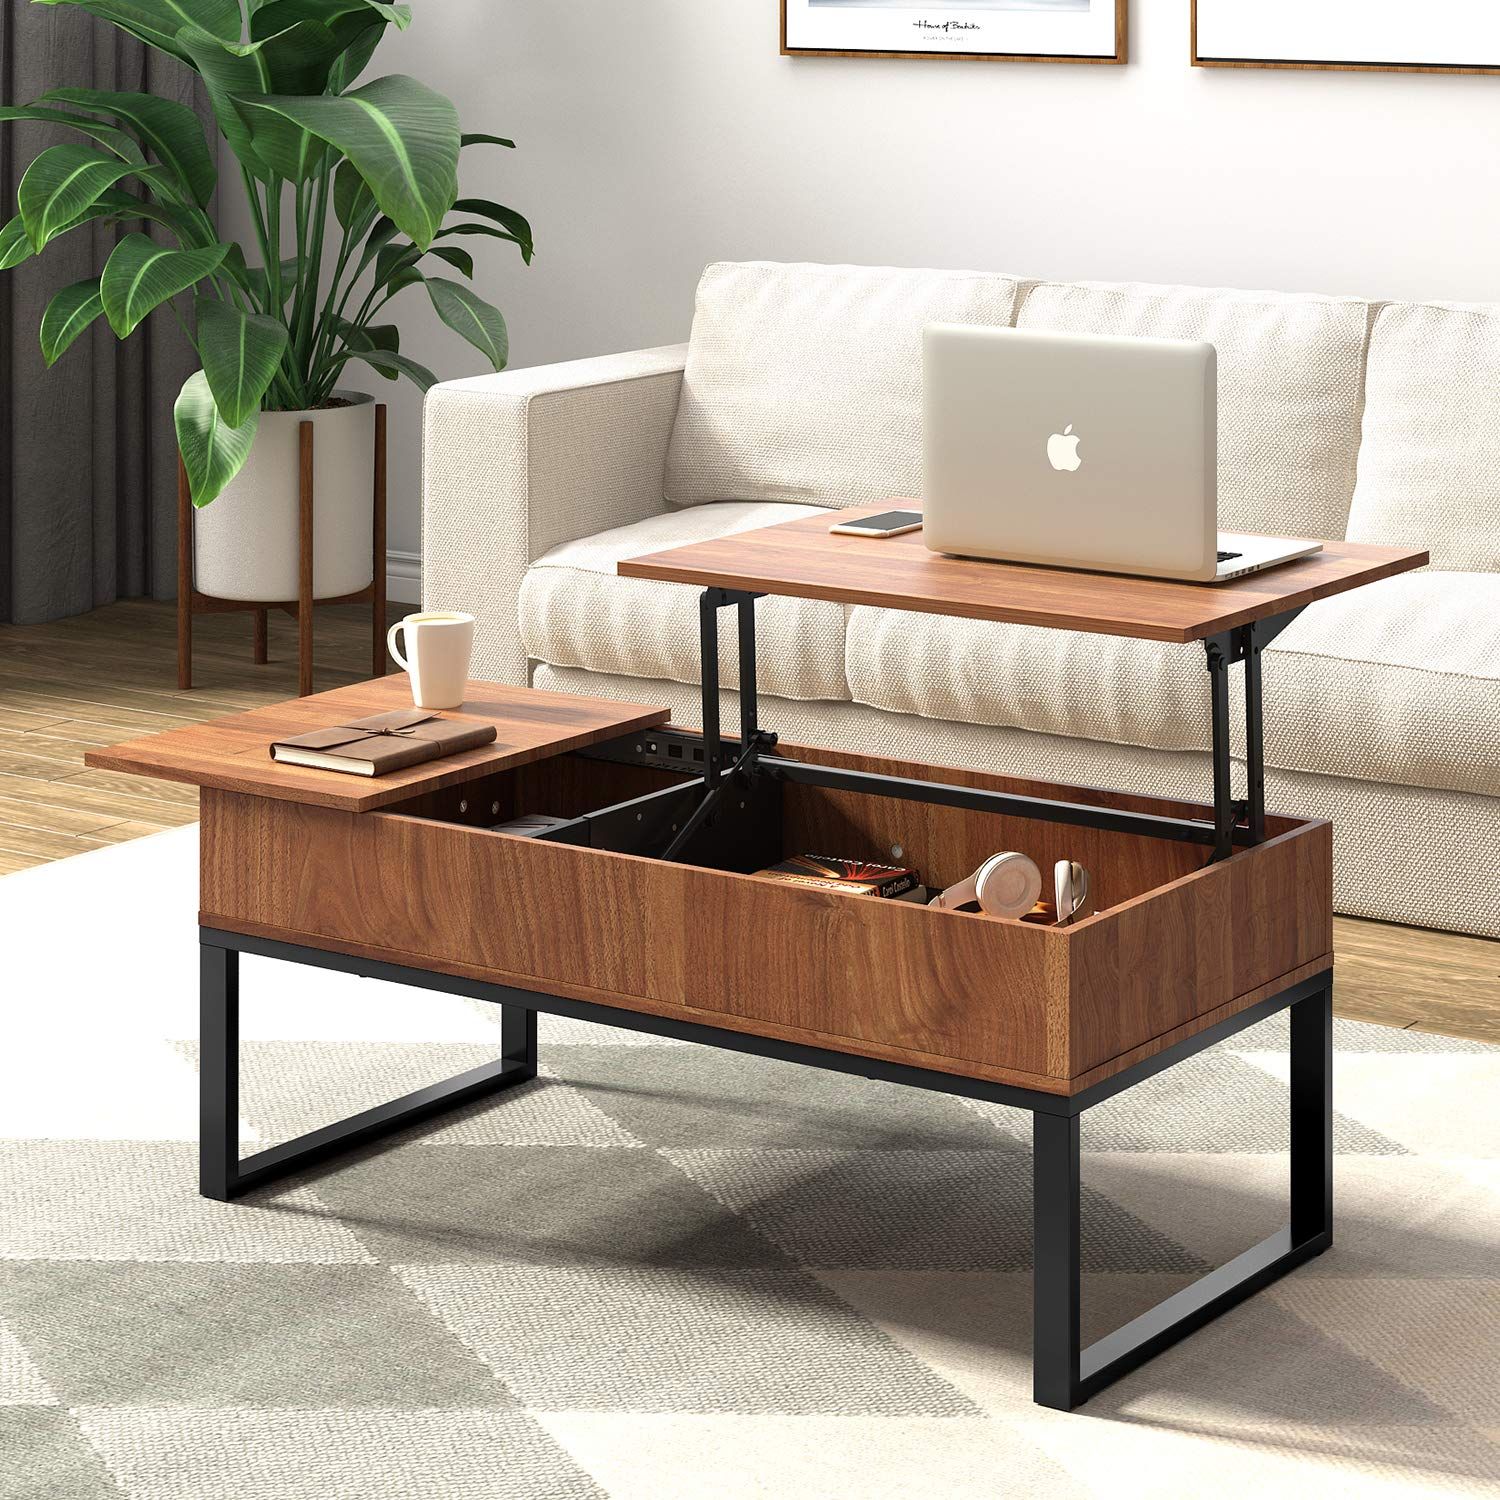 Wlive Wood Coffee Table With Adjustable Lift Top Table, Metal Frame With Regard To Modern Wooden Lift Top Tables (View 2 of 20)